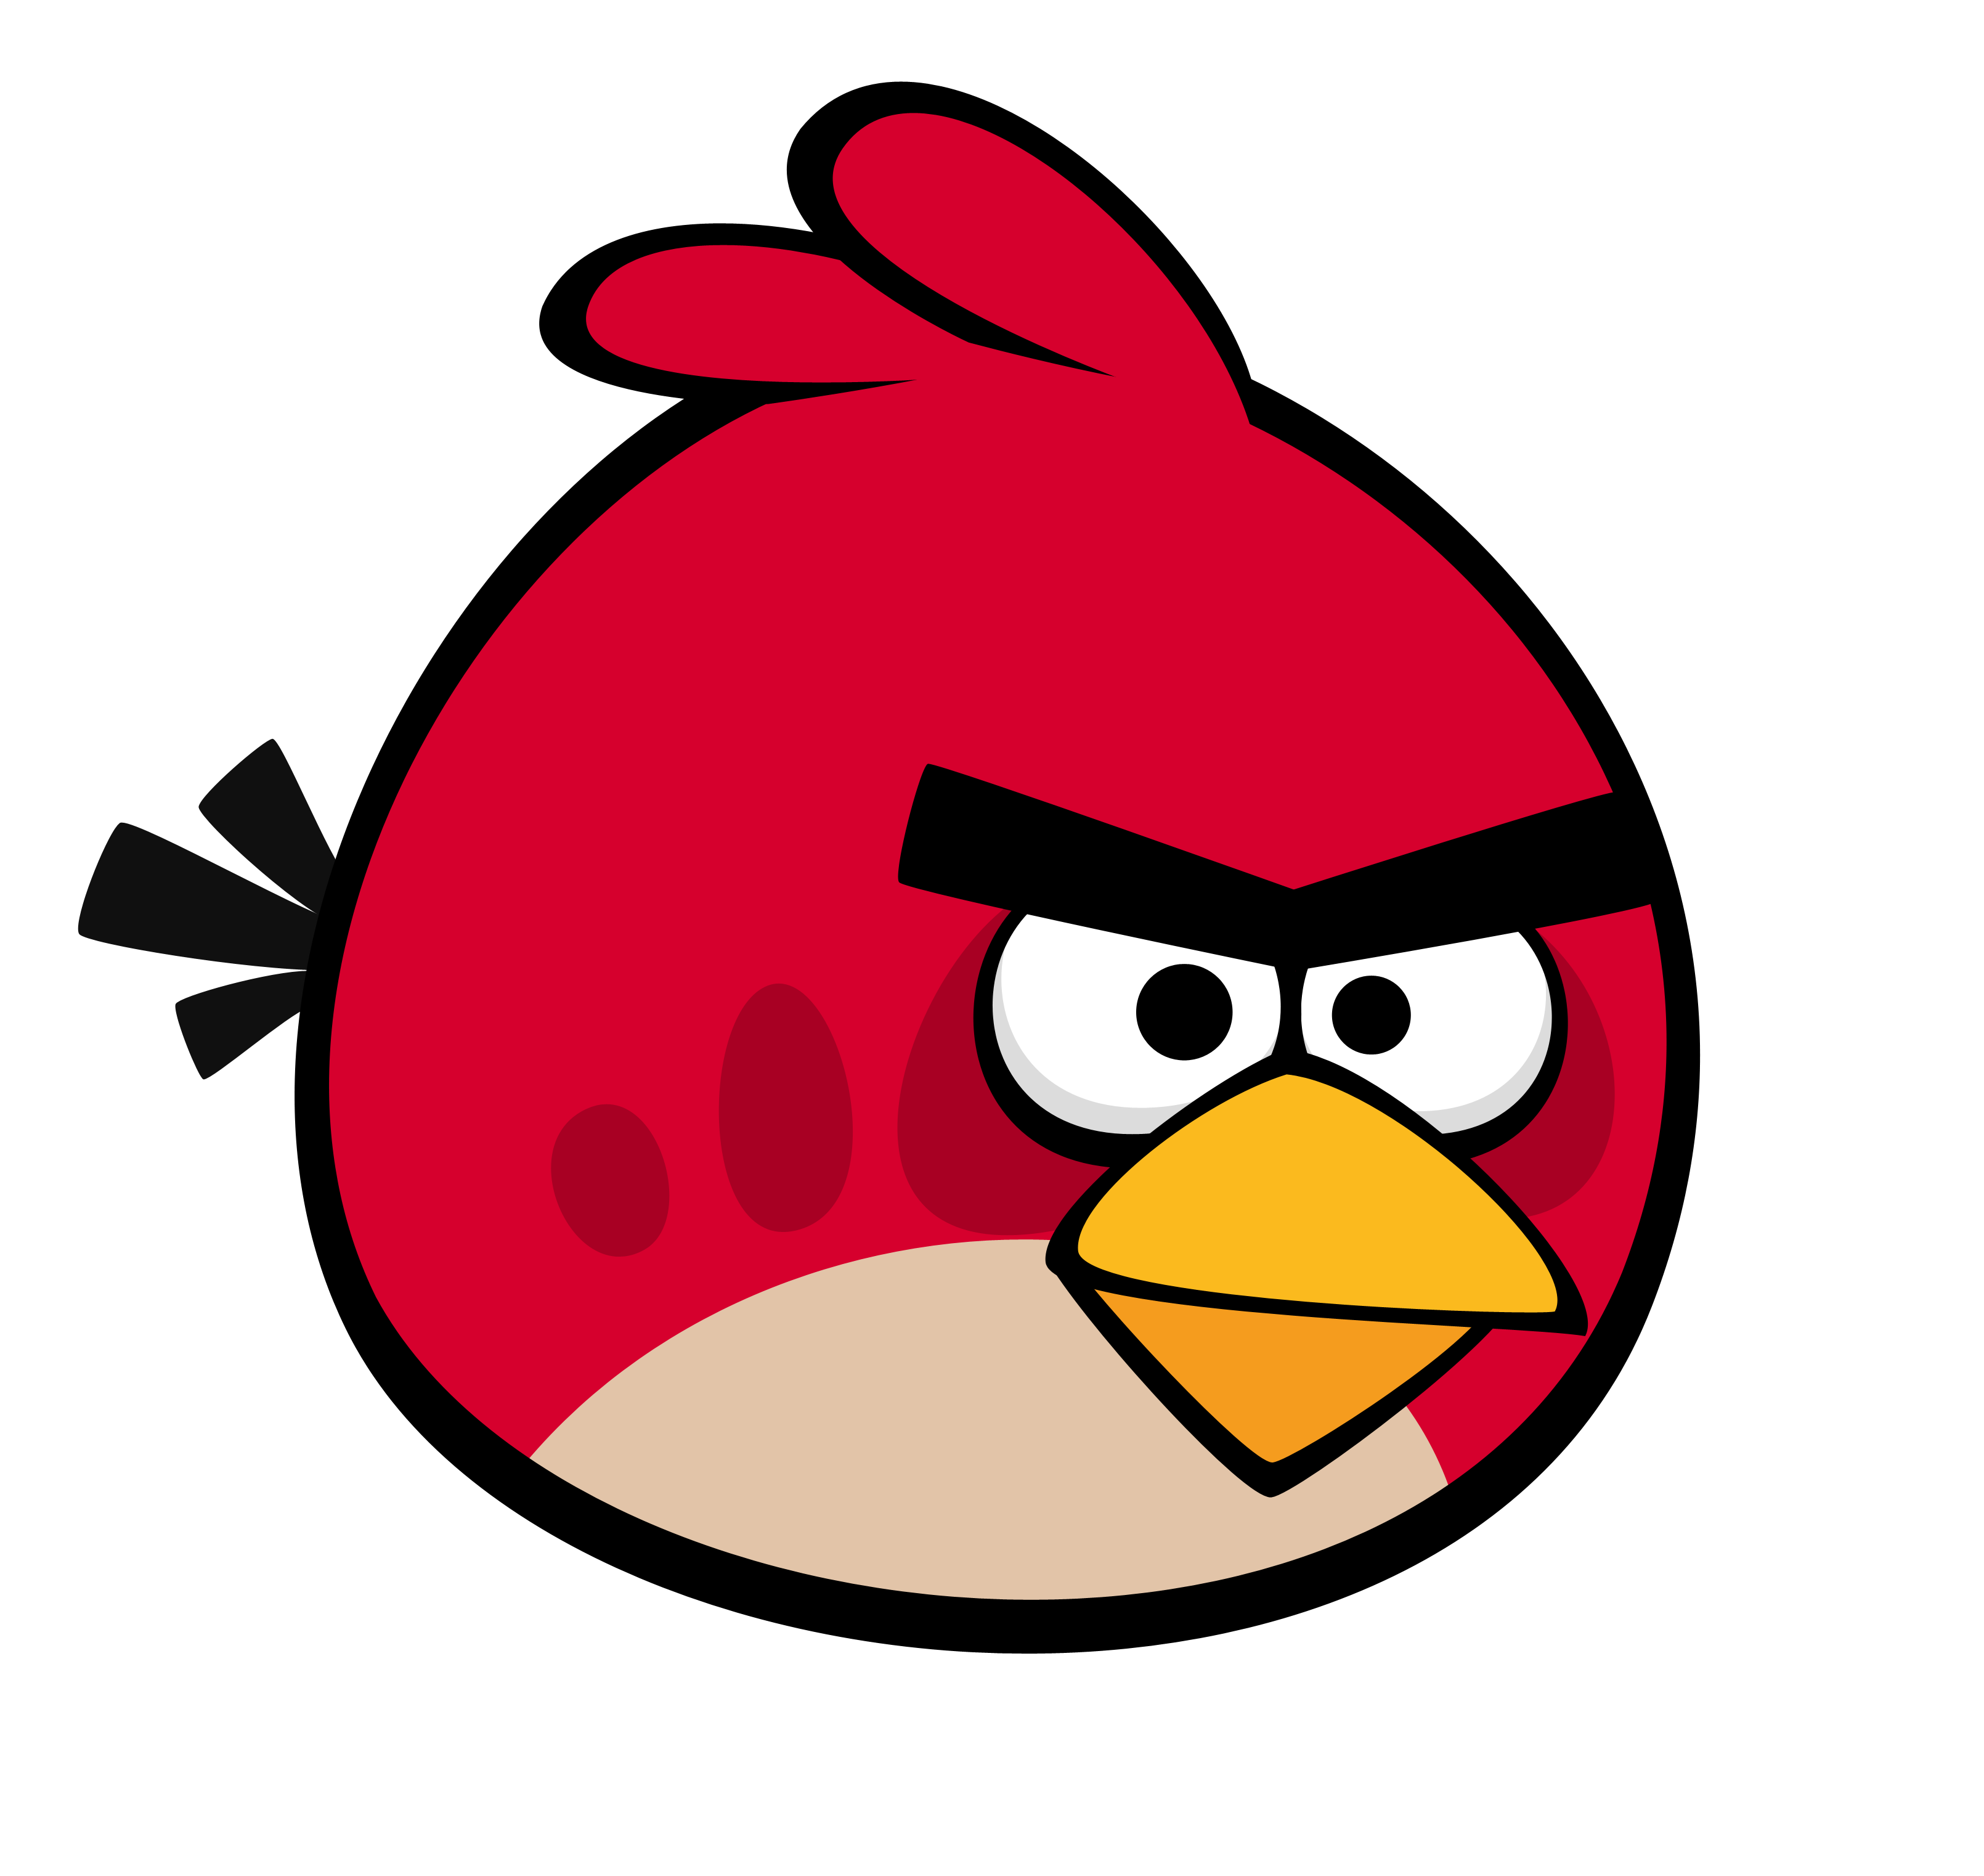 Angry_Bird_red